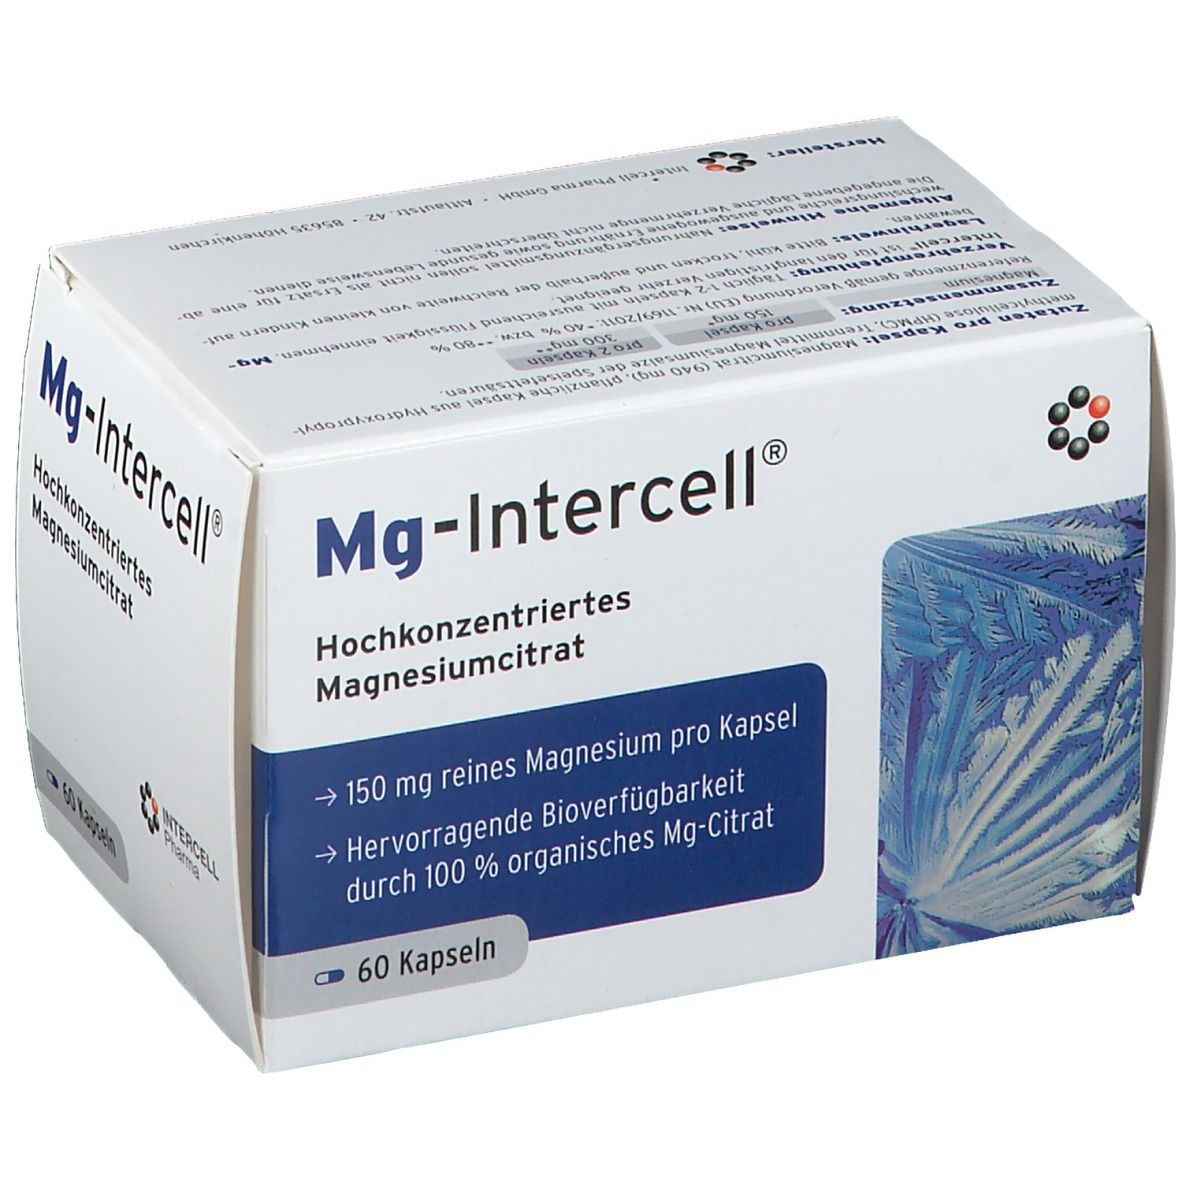 Mg-Intercell®